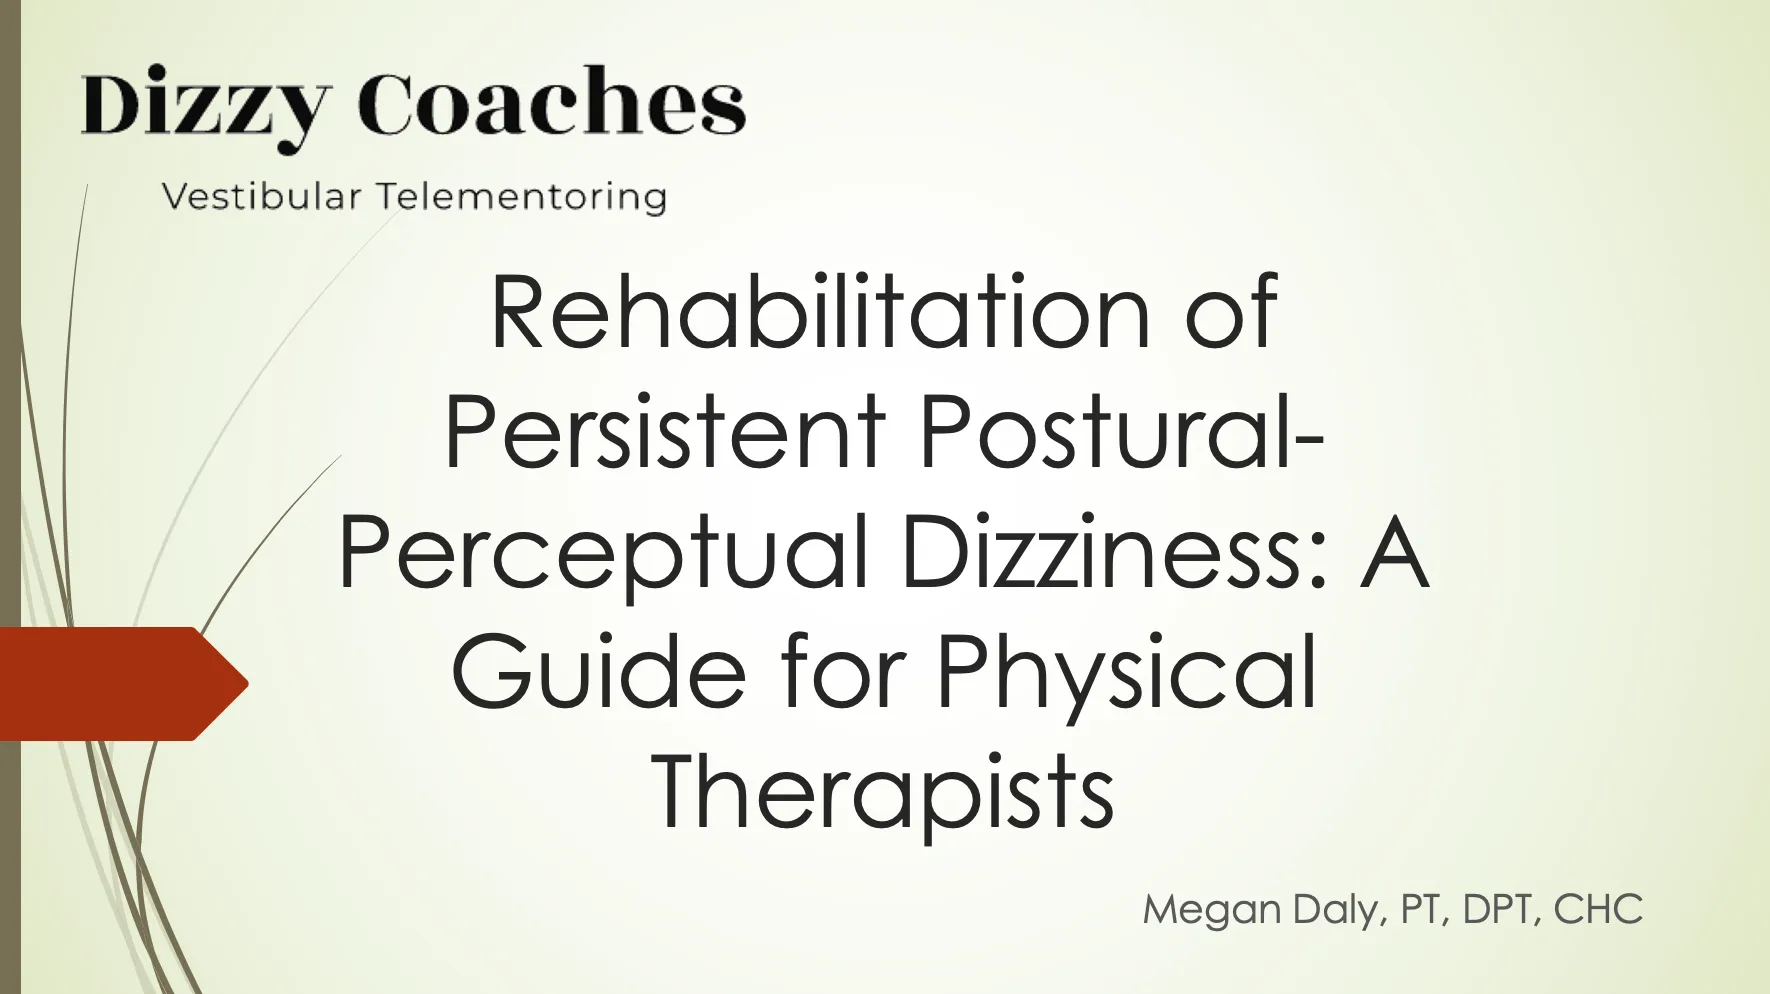 Persistent Postural-Perceptual Dizziness: A Guide for Physical Therapists